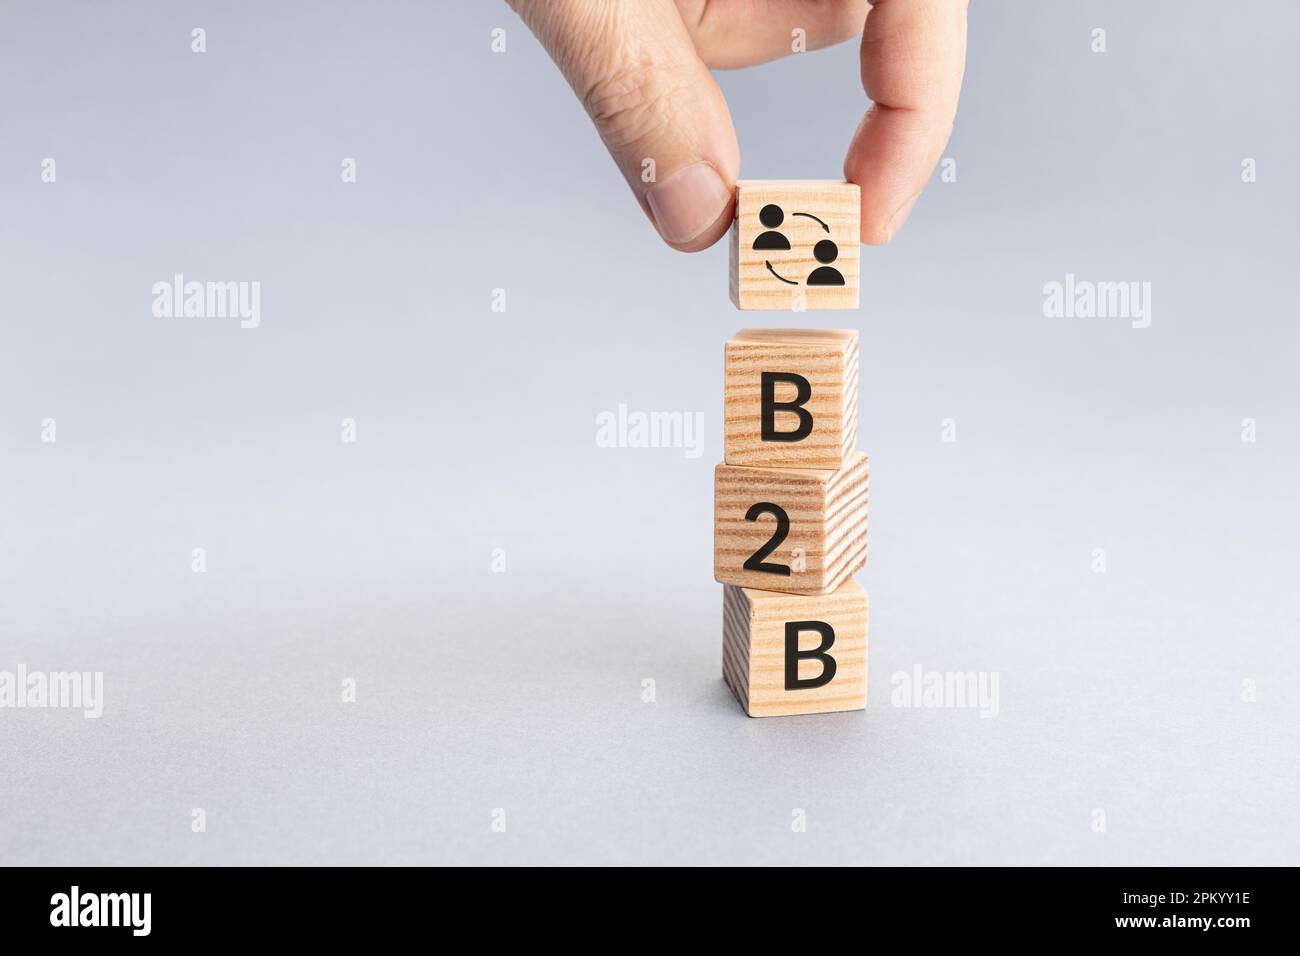 Business to Business B2B concept. Hand putting a block with icon and text word on top of others. Copy space Stock Photo